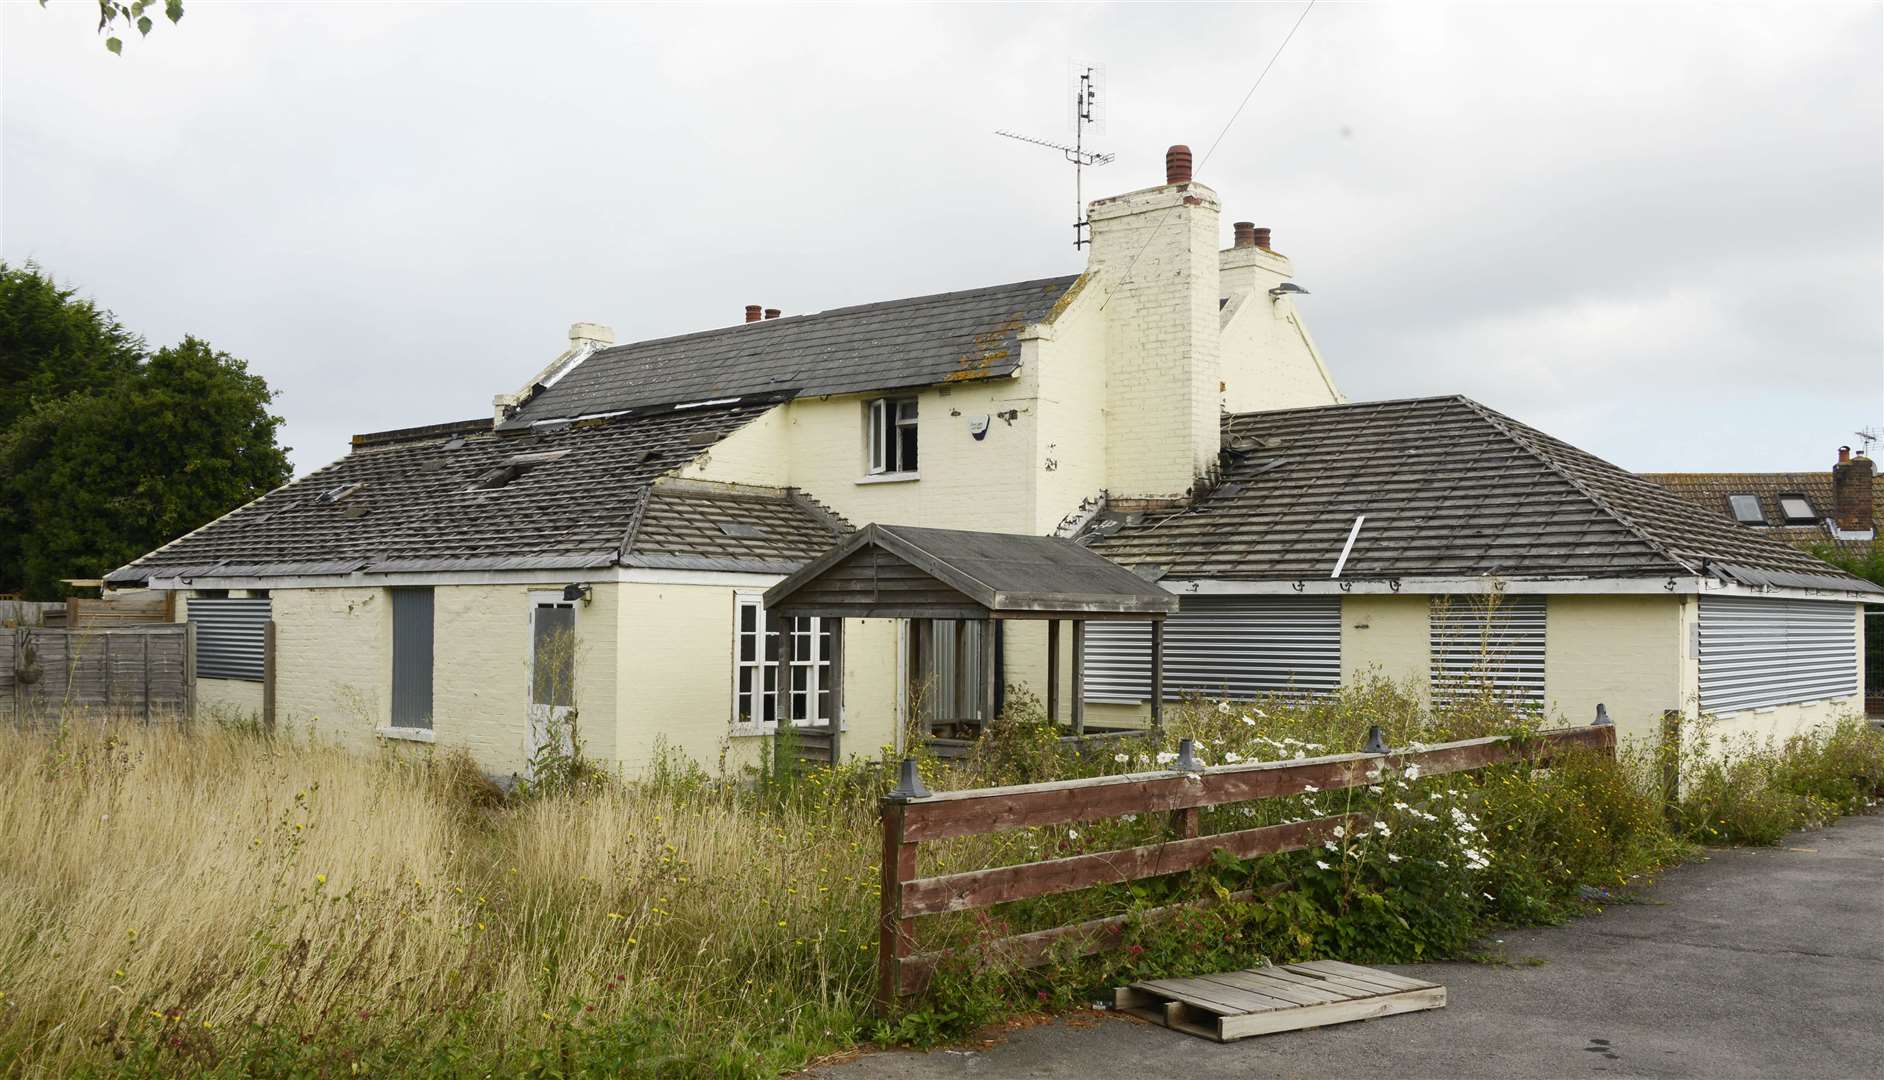 The site of the former Plough Inn will soon contain six new homes